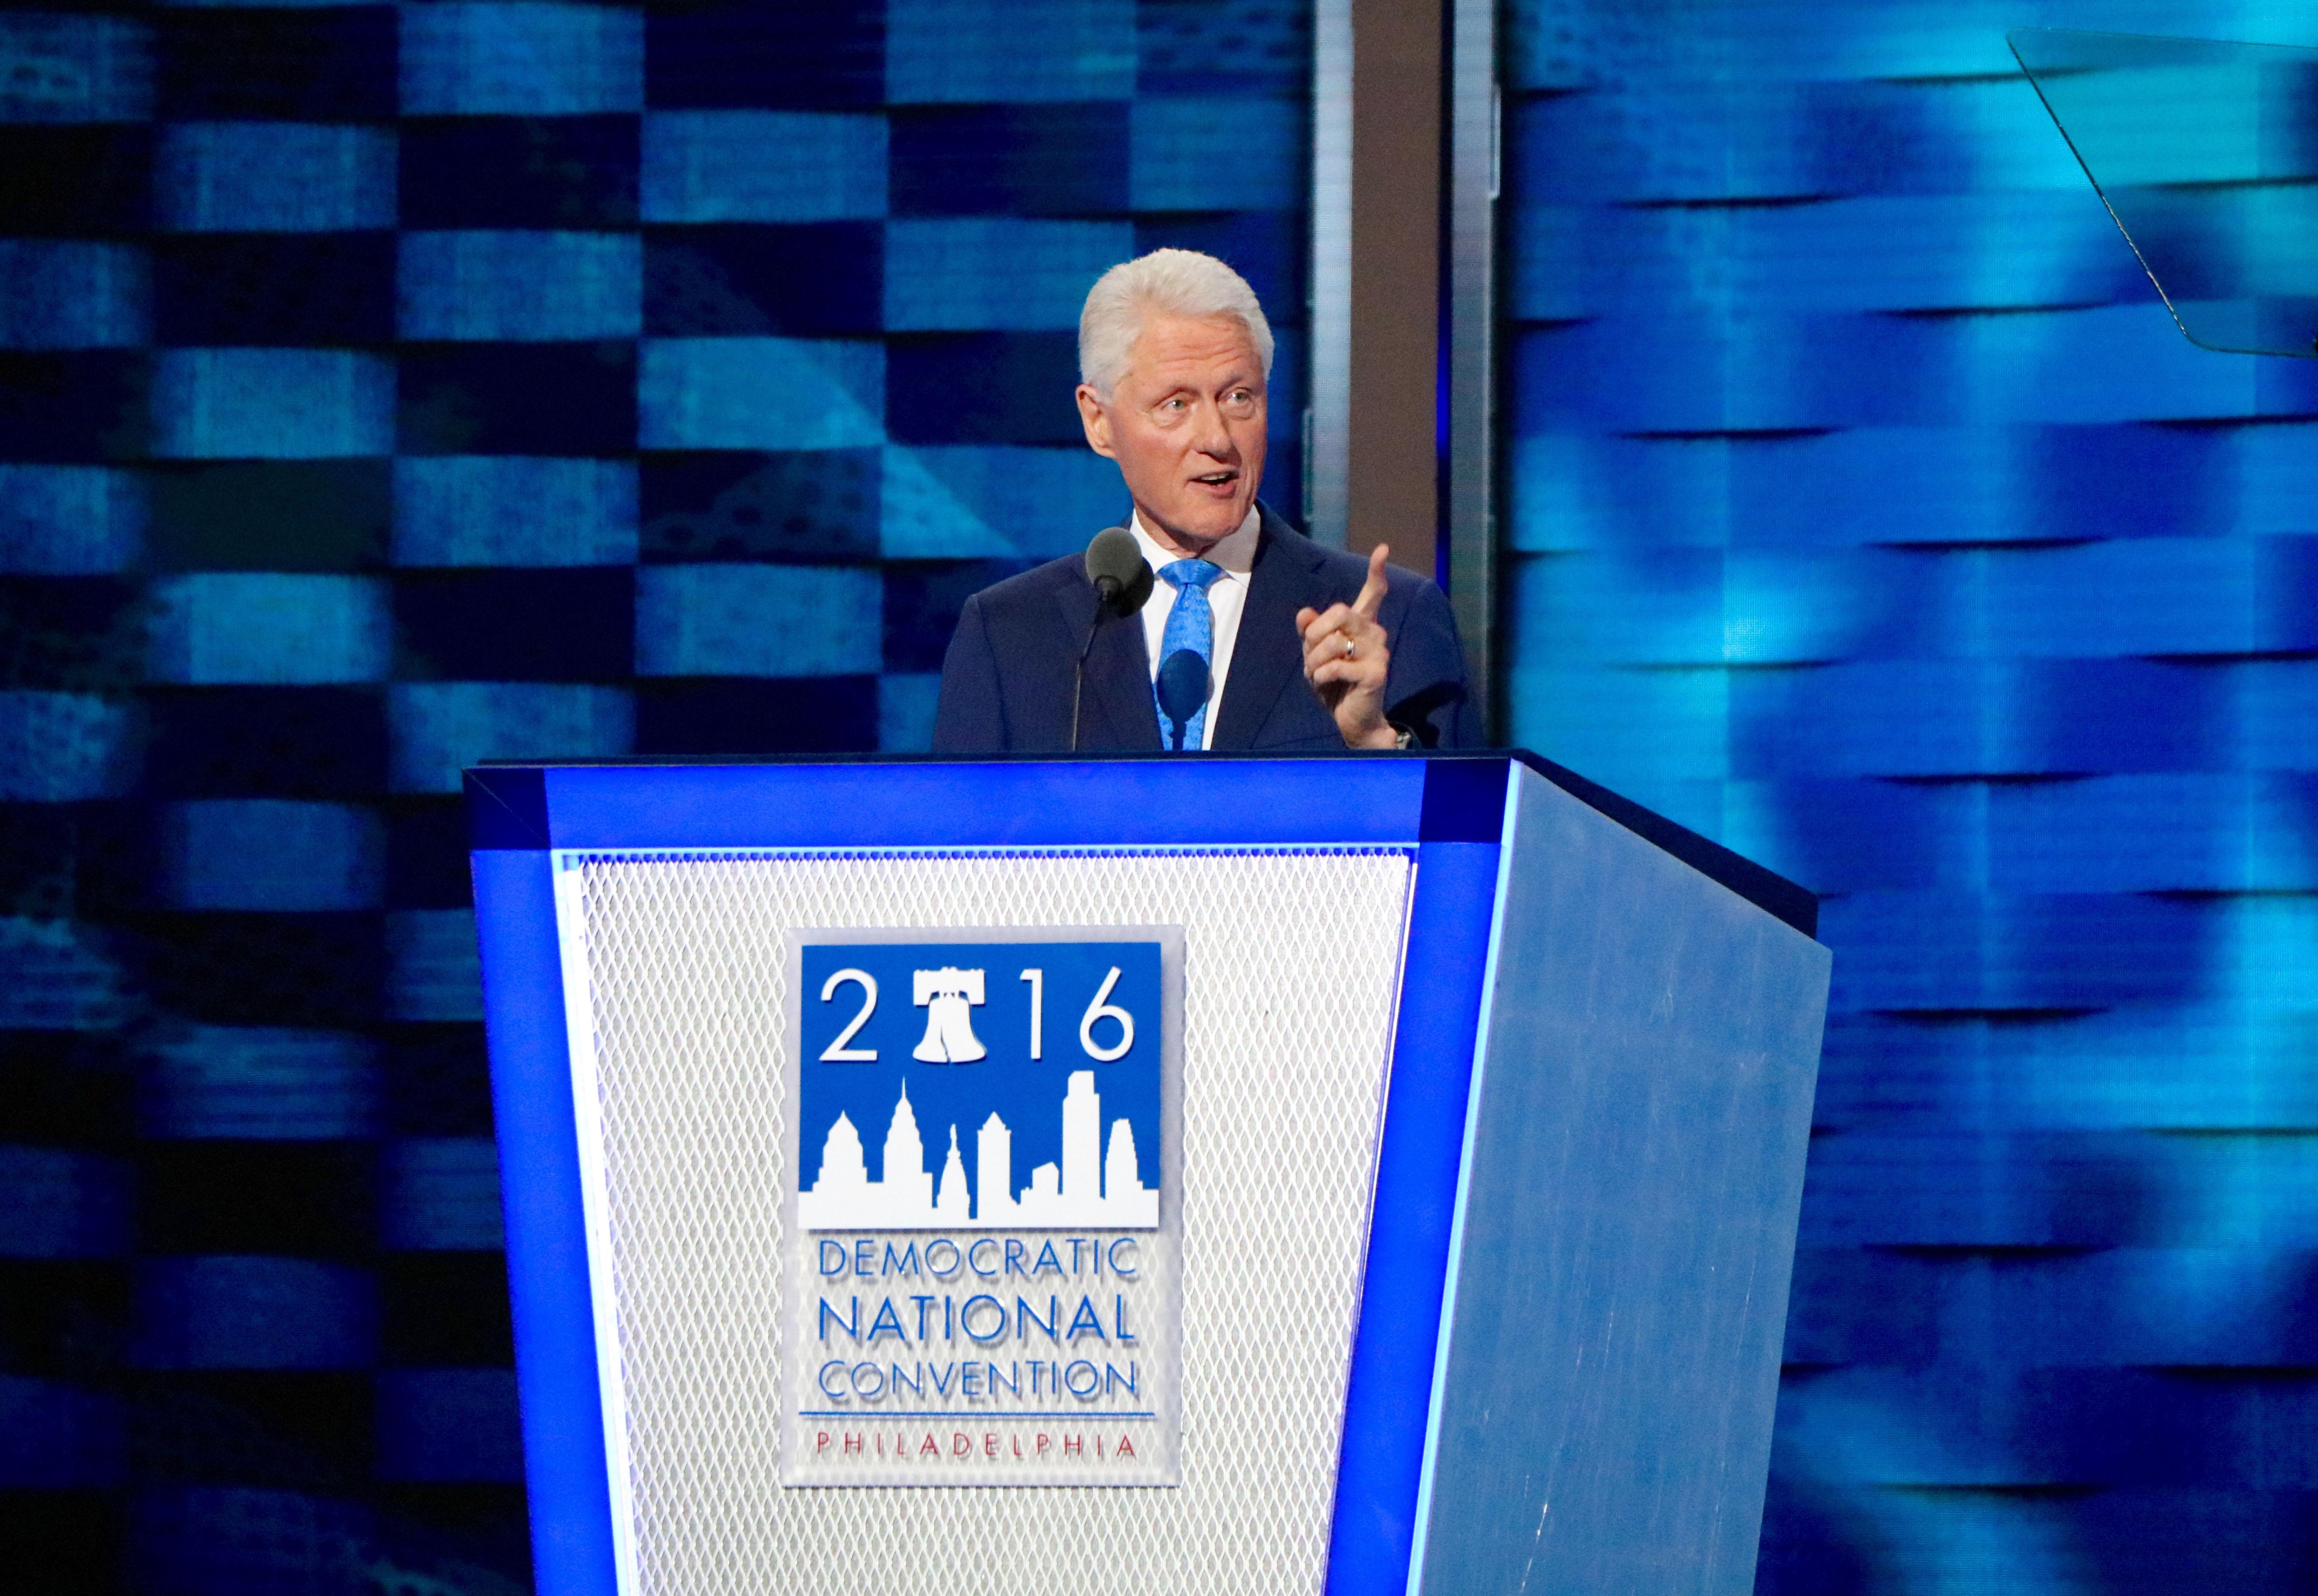 Former President Bill Clinton speaks on July 26 at the 2016 Democratic National Convention. Clinton recounted the story of meeting his wife, Democratic presidential nominee Hillary Clinton, and exalted her as a "change maker." (Evan Garcia / Chicago Tonight)